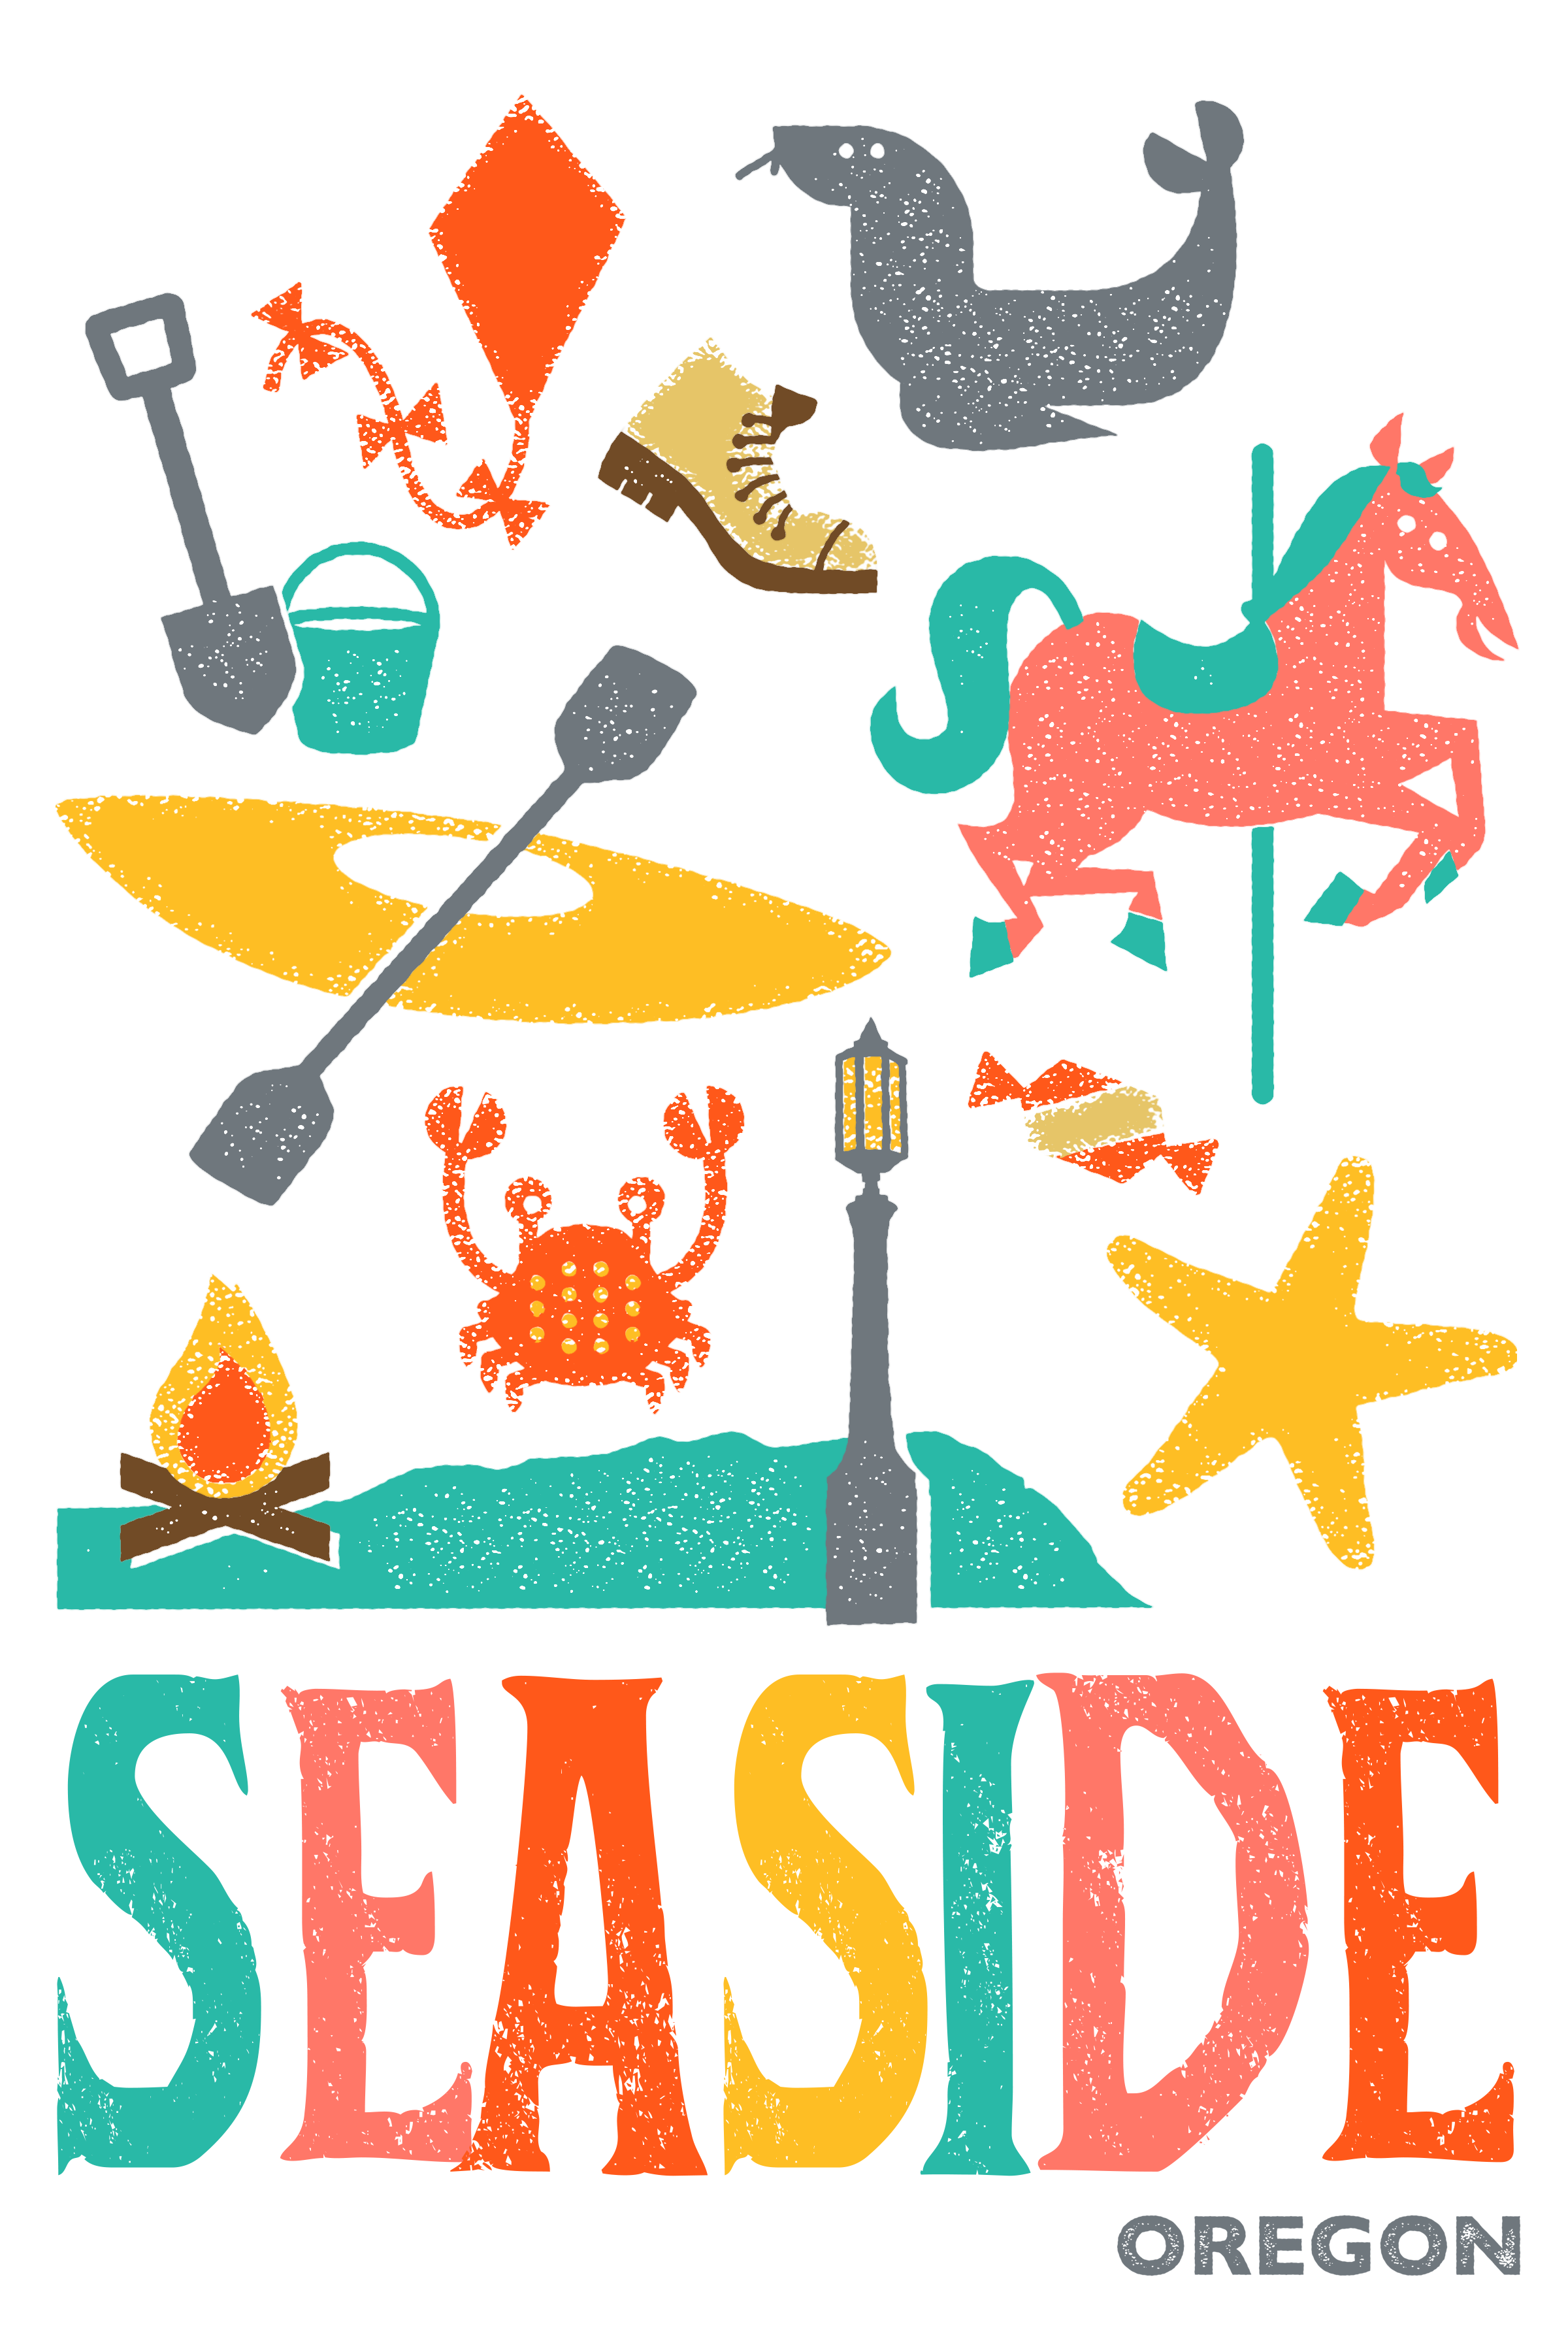 Rebranding seaside gives us. Excited clipart opportunity